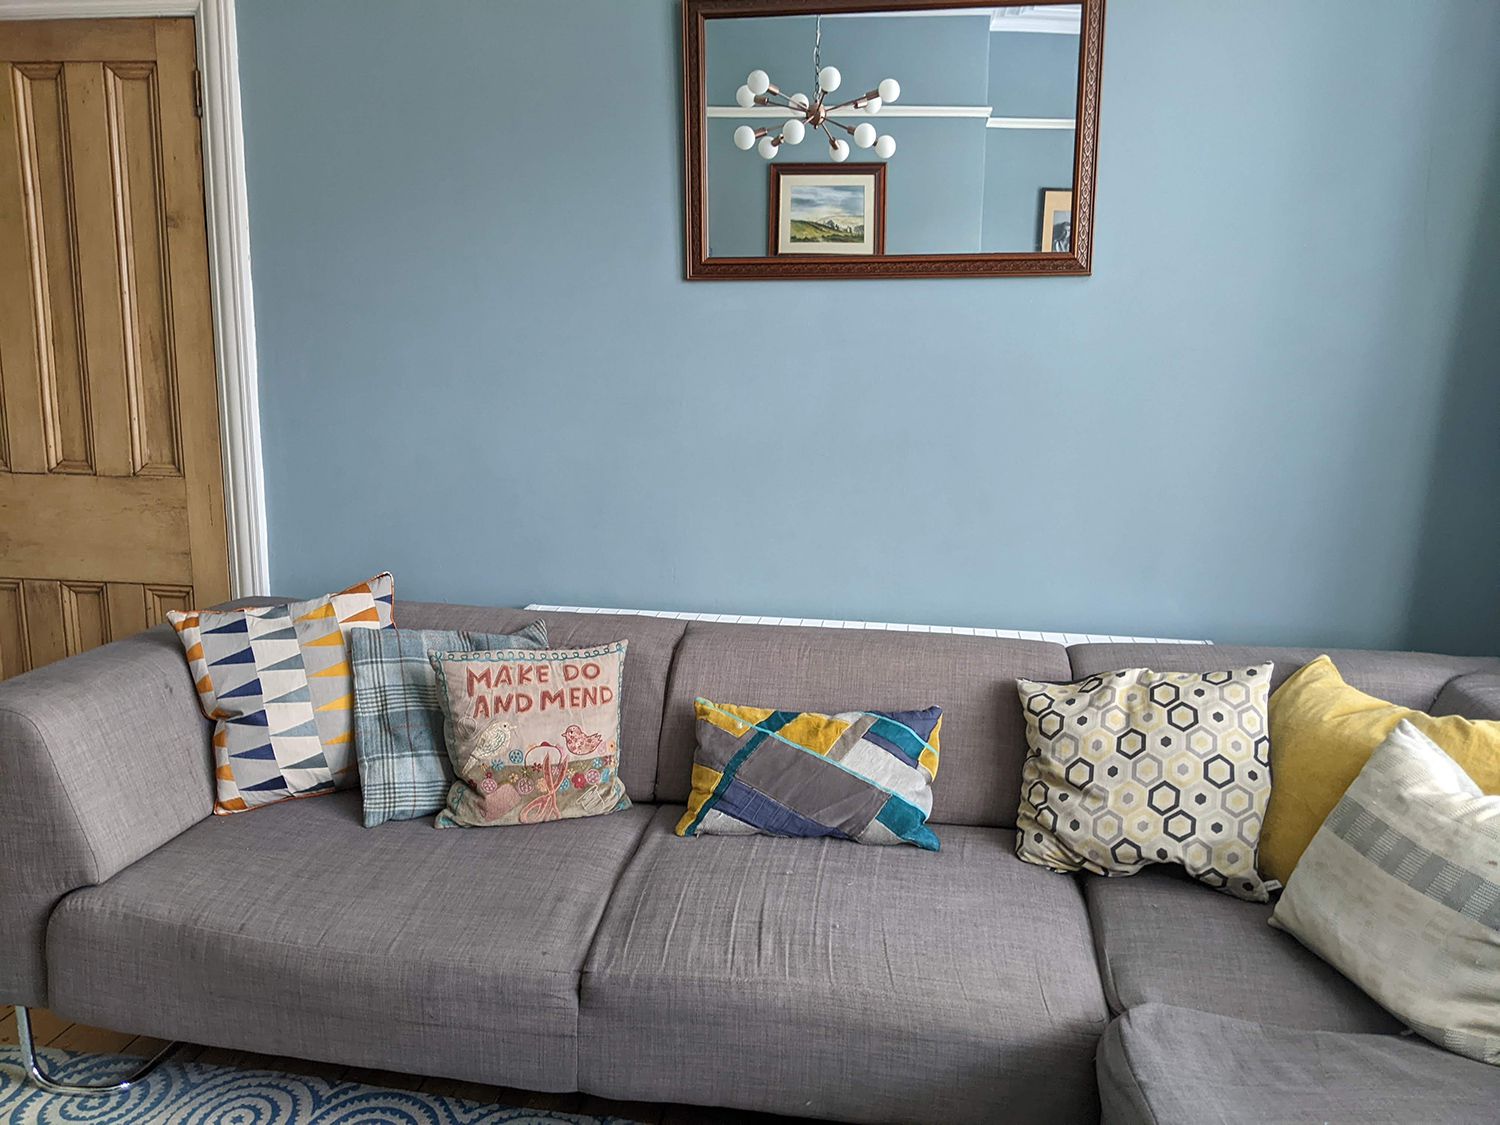 A before photo showing the worn our grey sofa in front of blue grey walls.